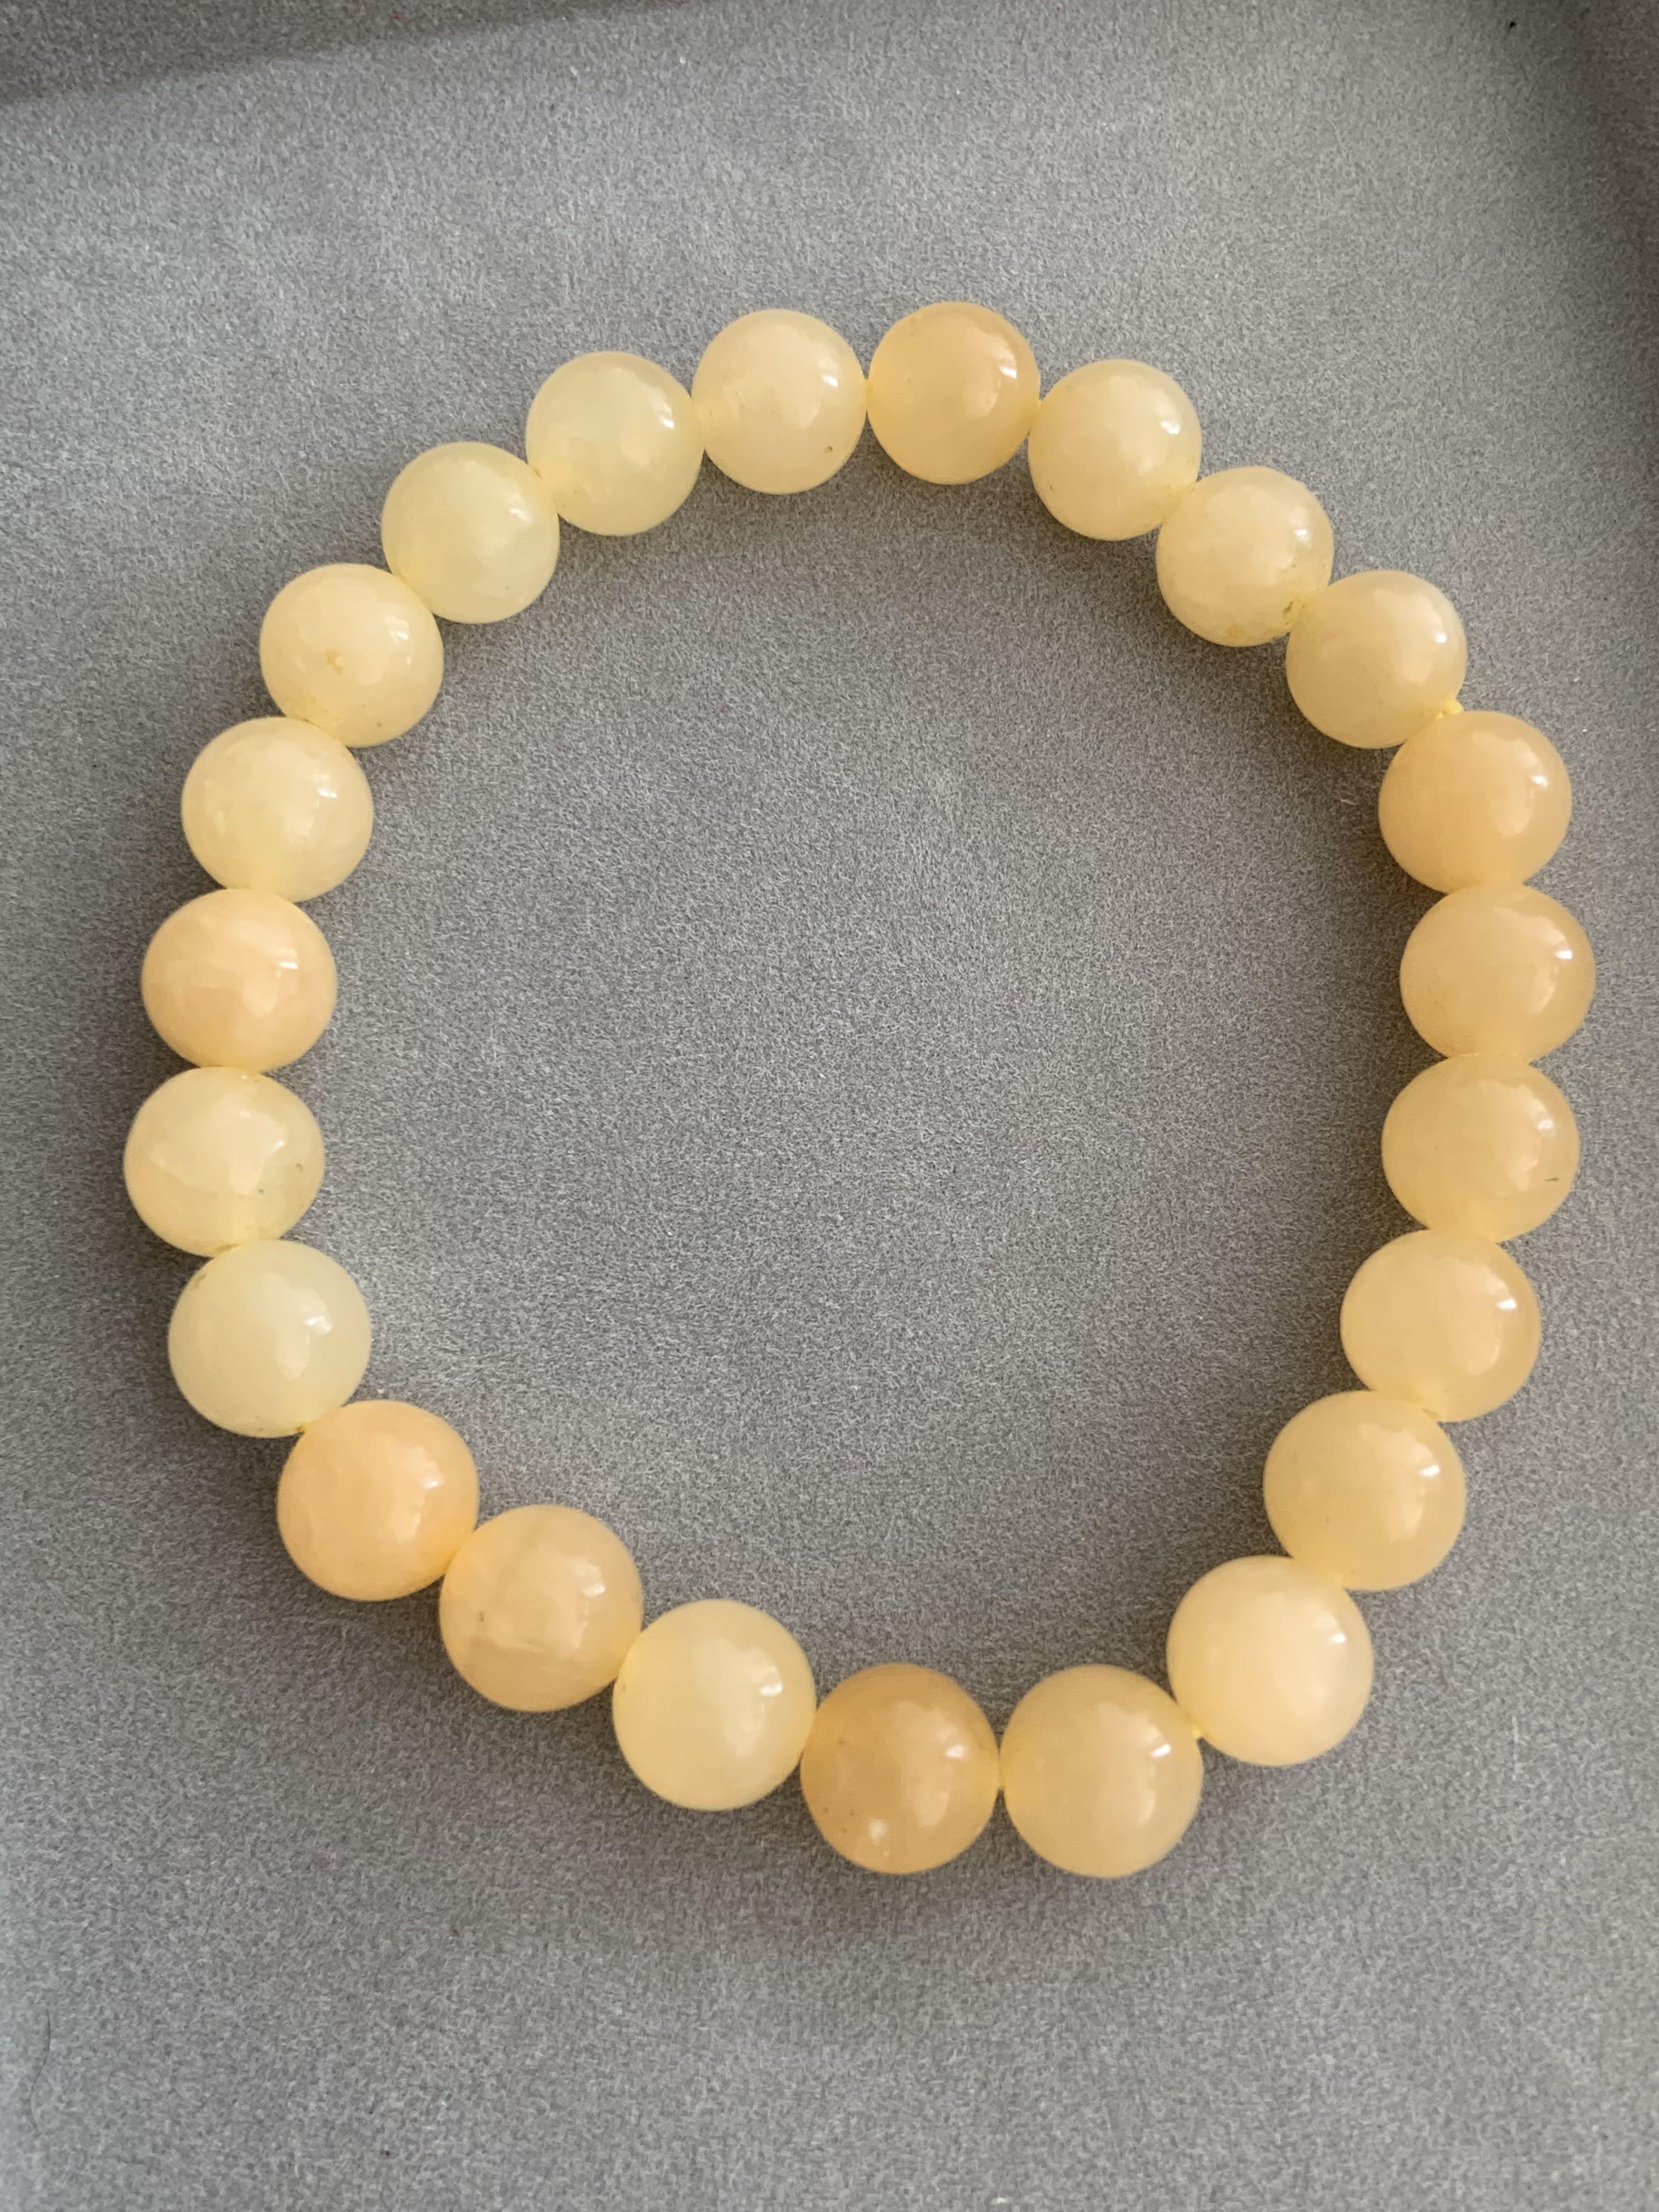 Aggregate 80 yellow jade bracelet meaning super hot  POPPY